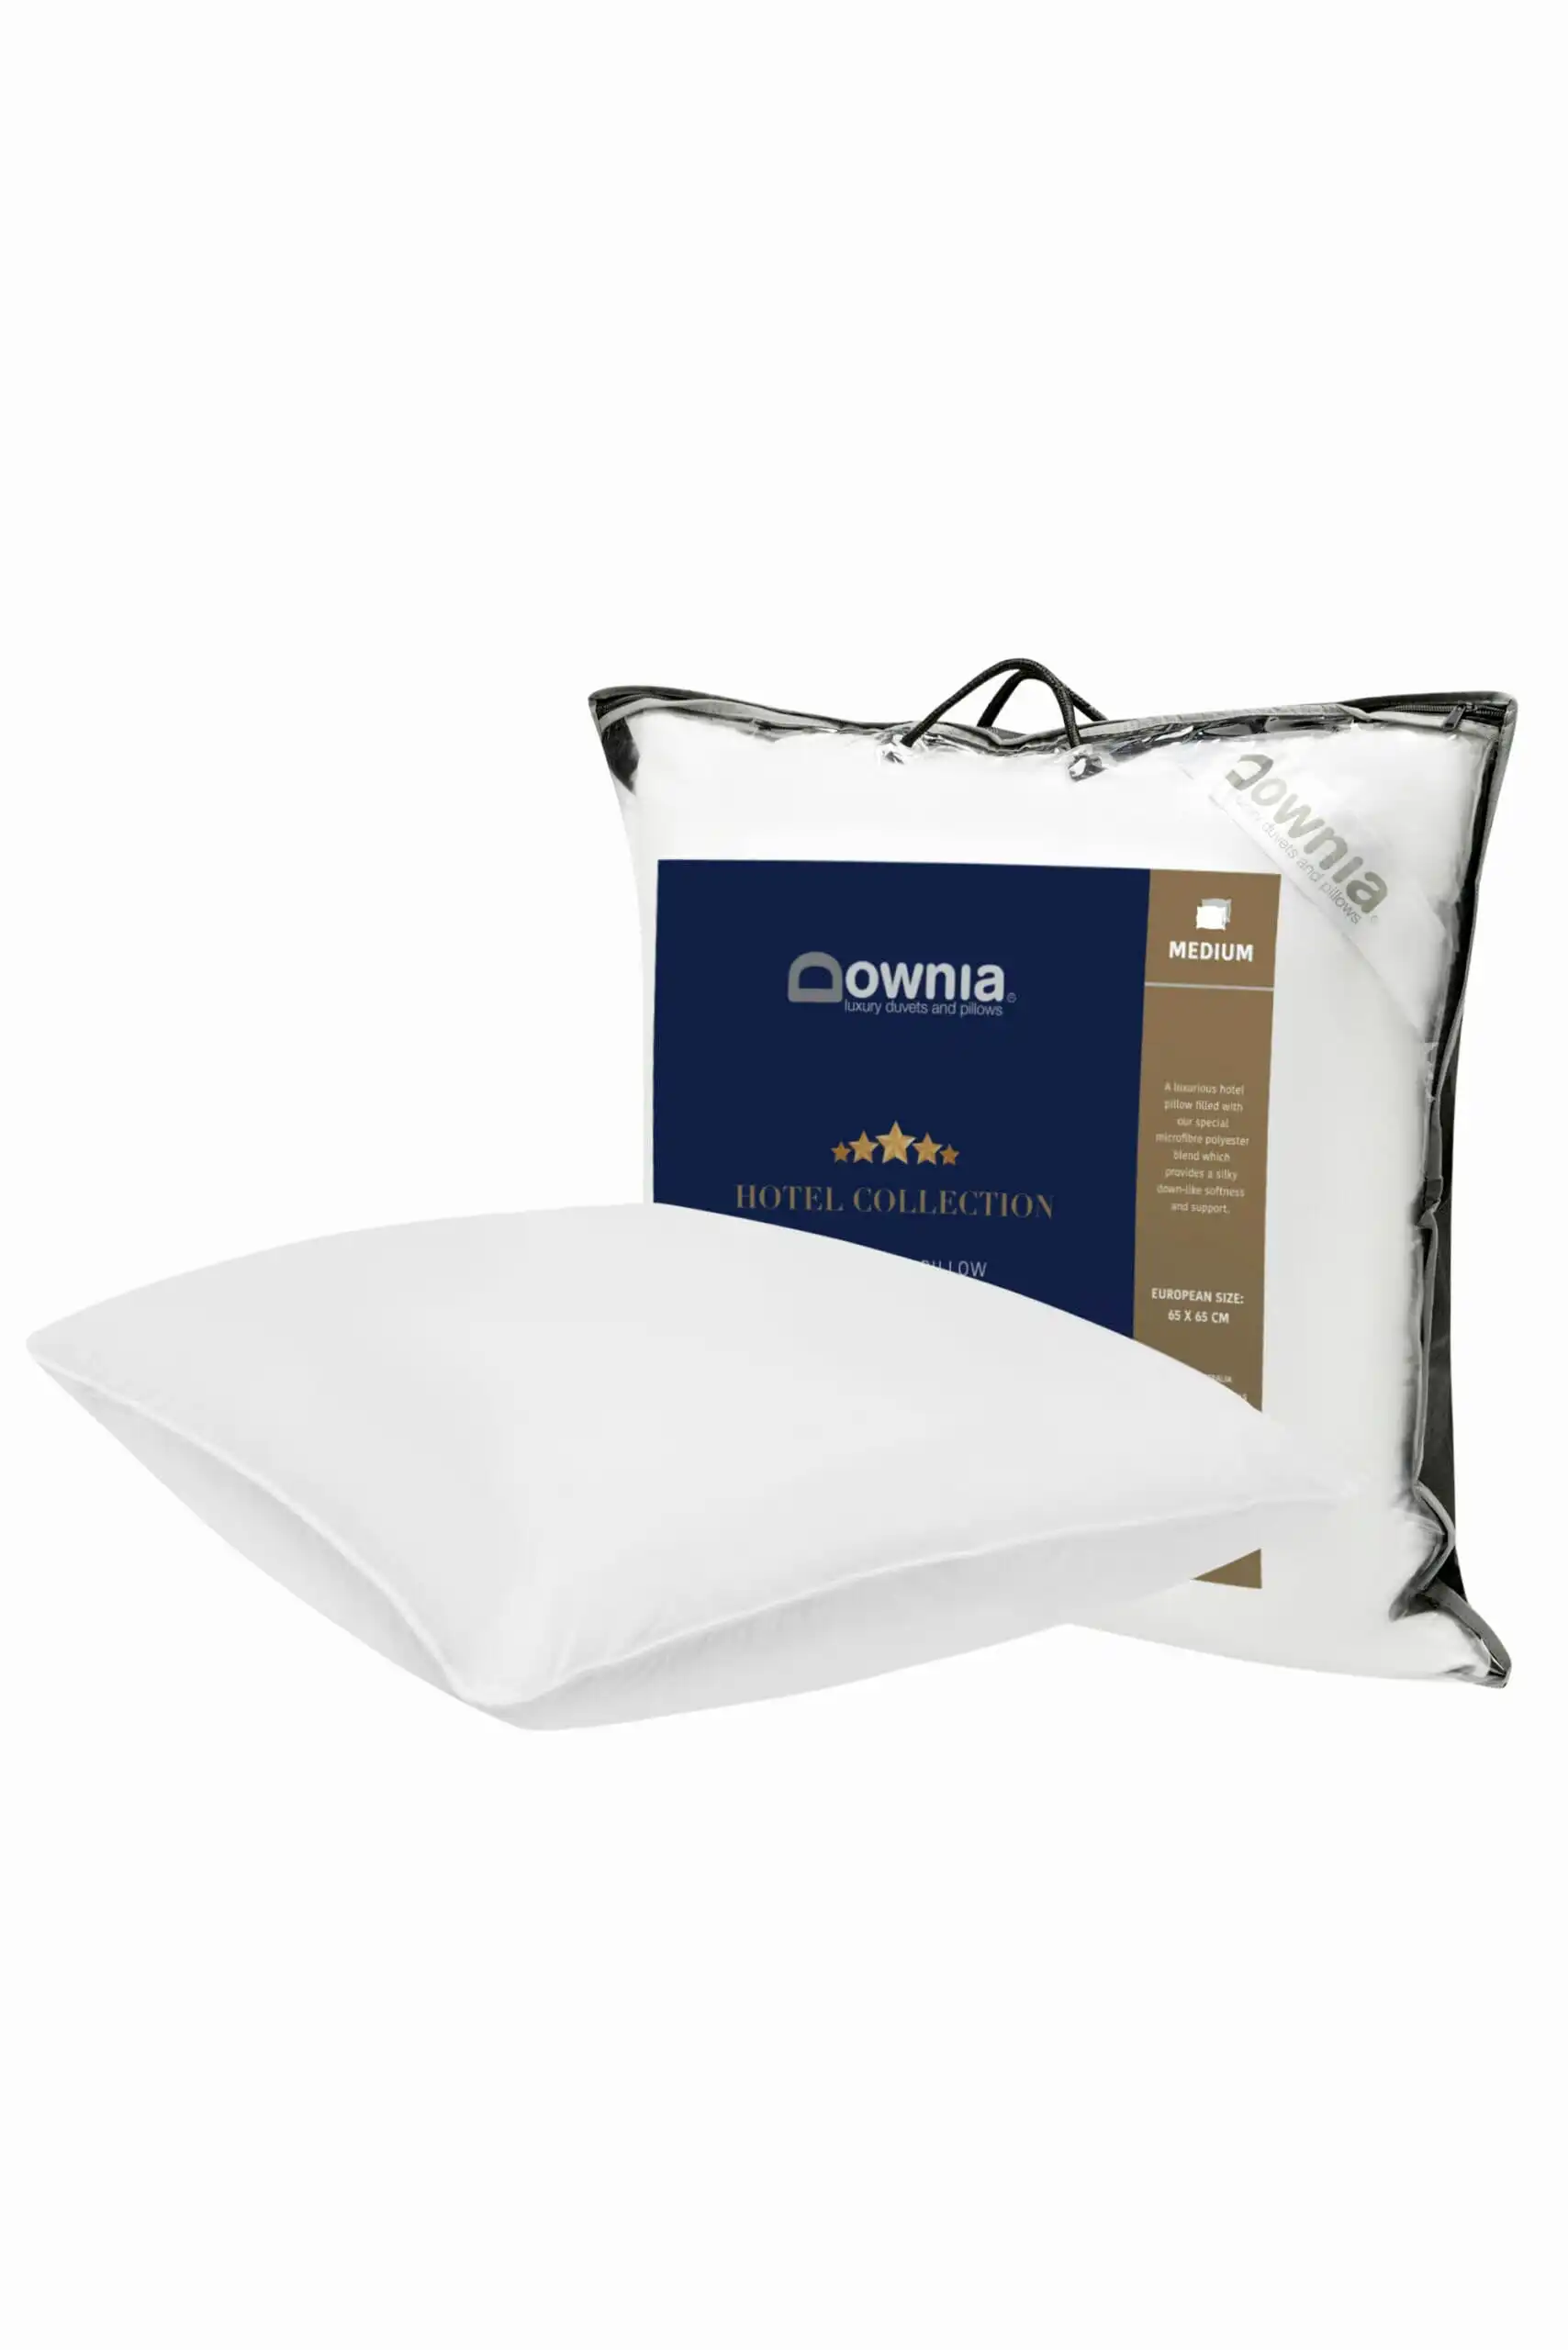 Downia HOTEL COLLECTION Microfibre Pillow - Firm